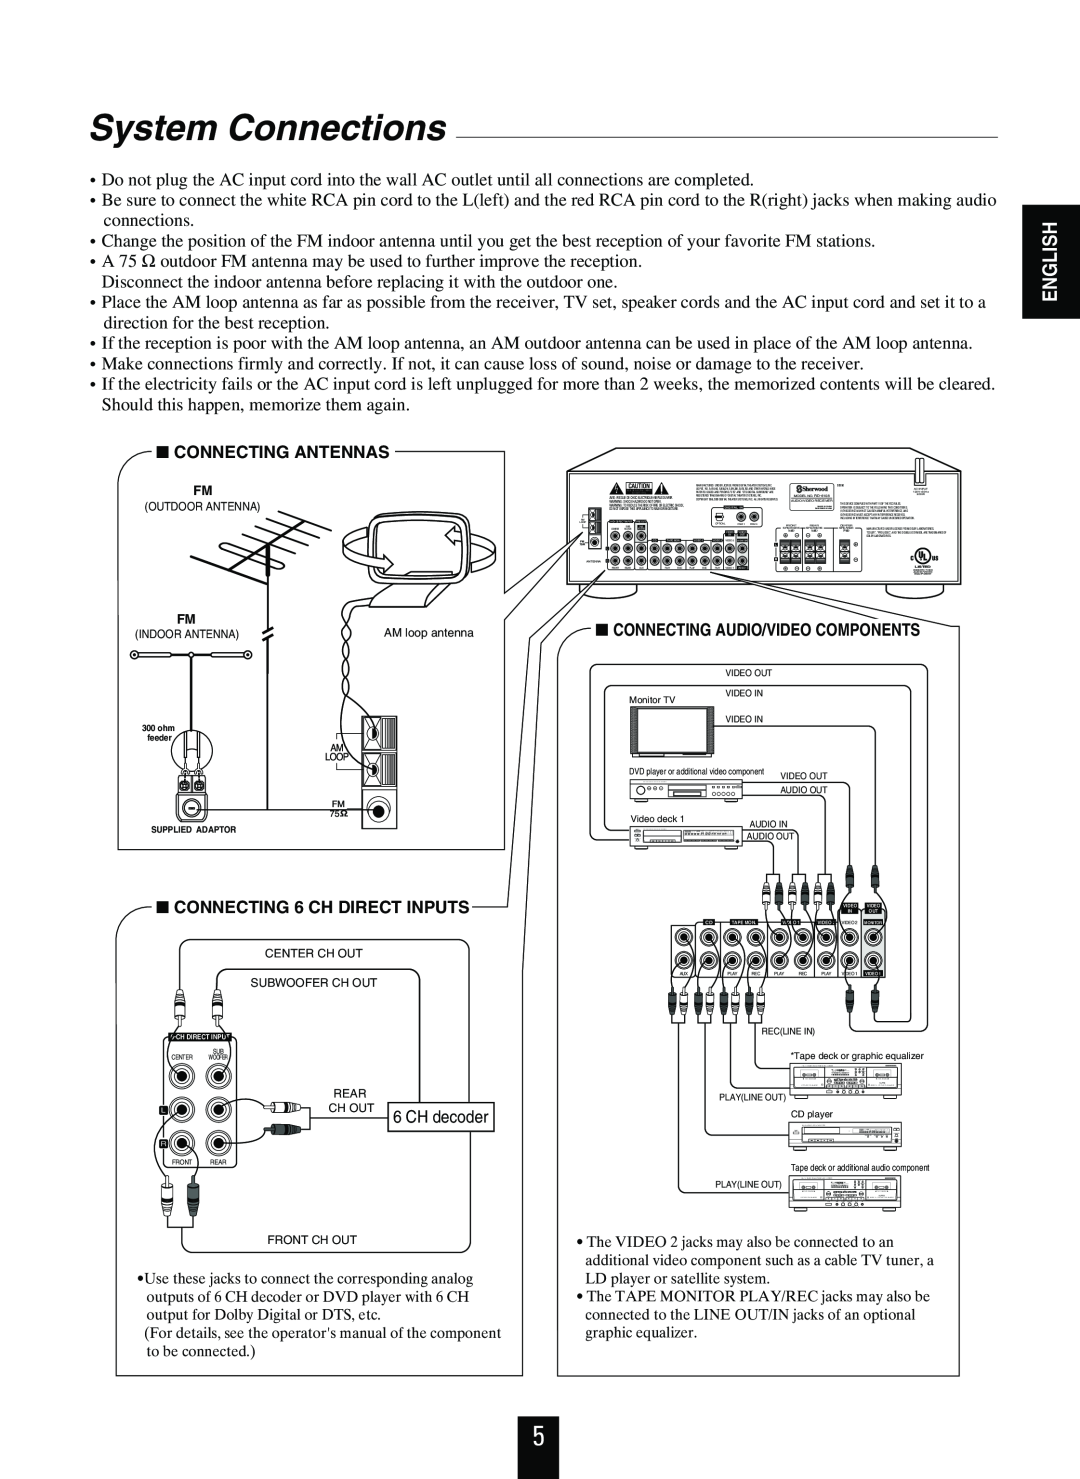 Sherwood RD-6108 manual System Connections, English, Connecting Antennas, CONNECTING 6 CH DIRECT INPUTS 